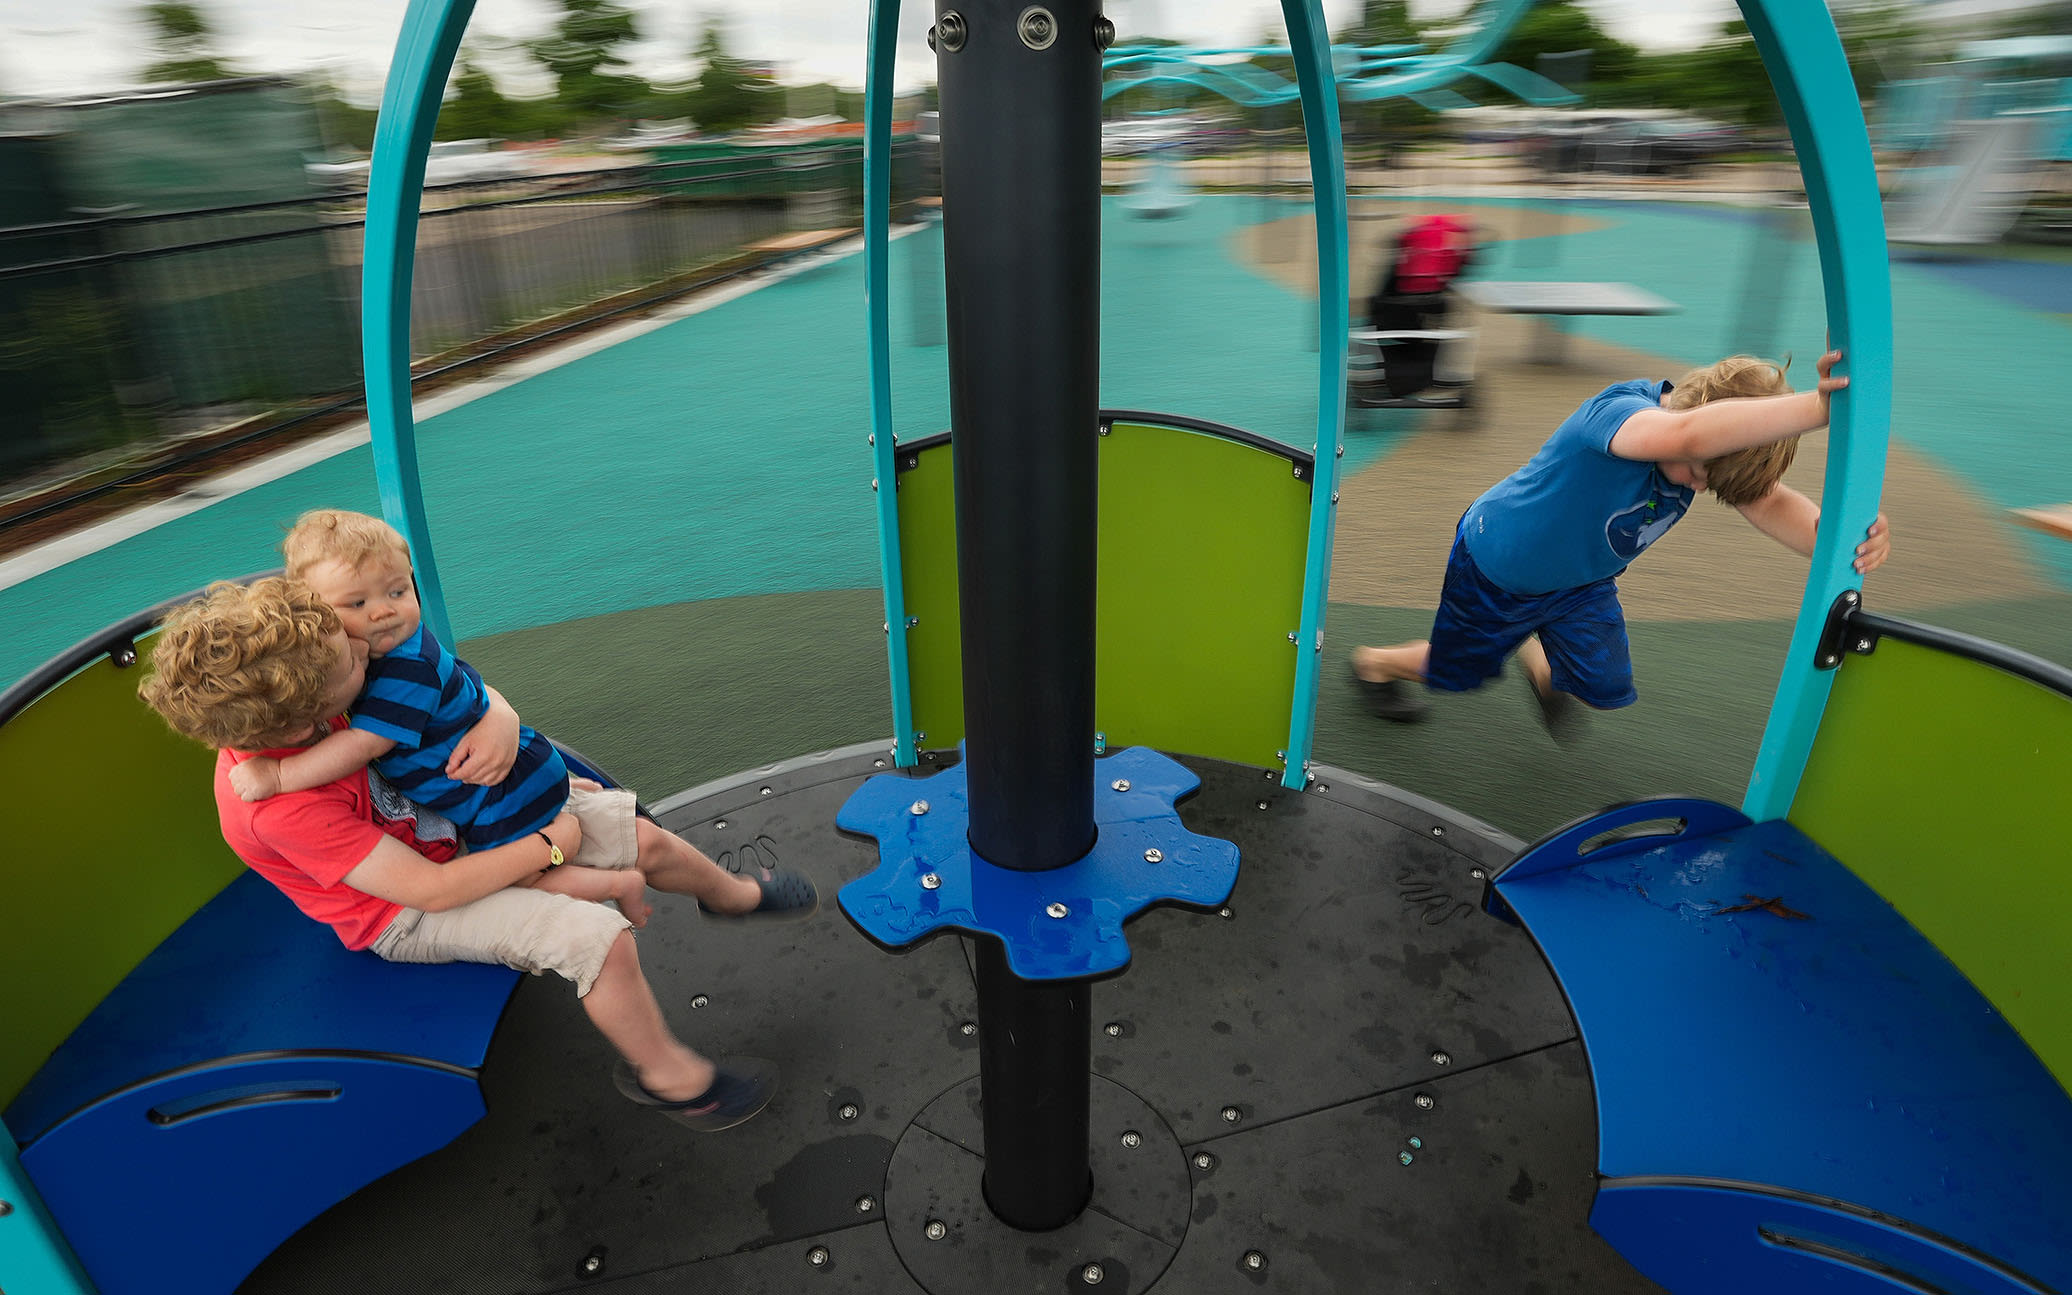 Inclusive Playgrounds Allow Children Of All Abilities To Play